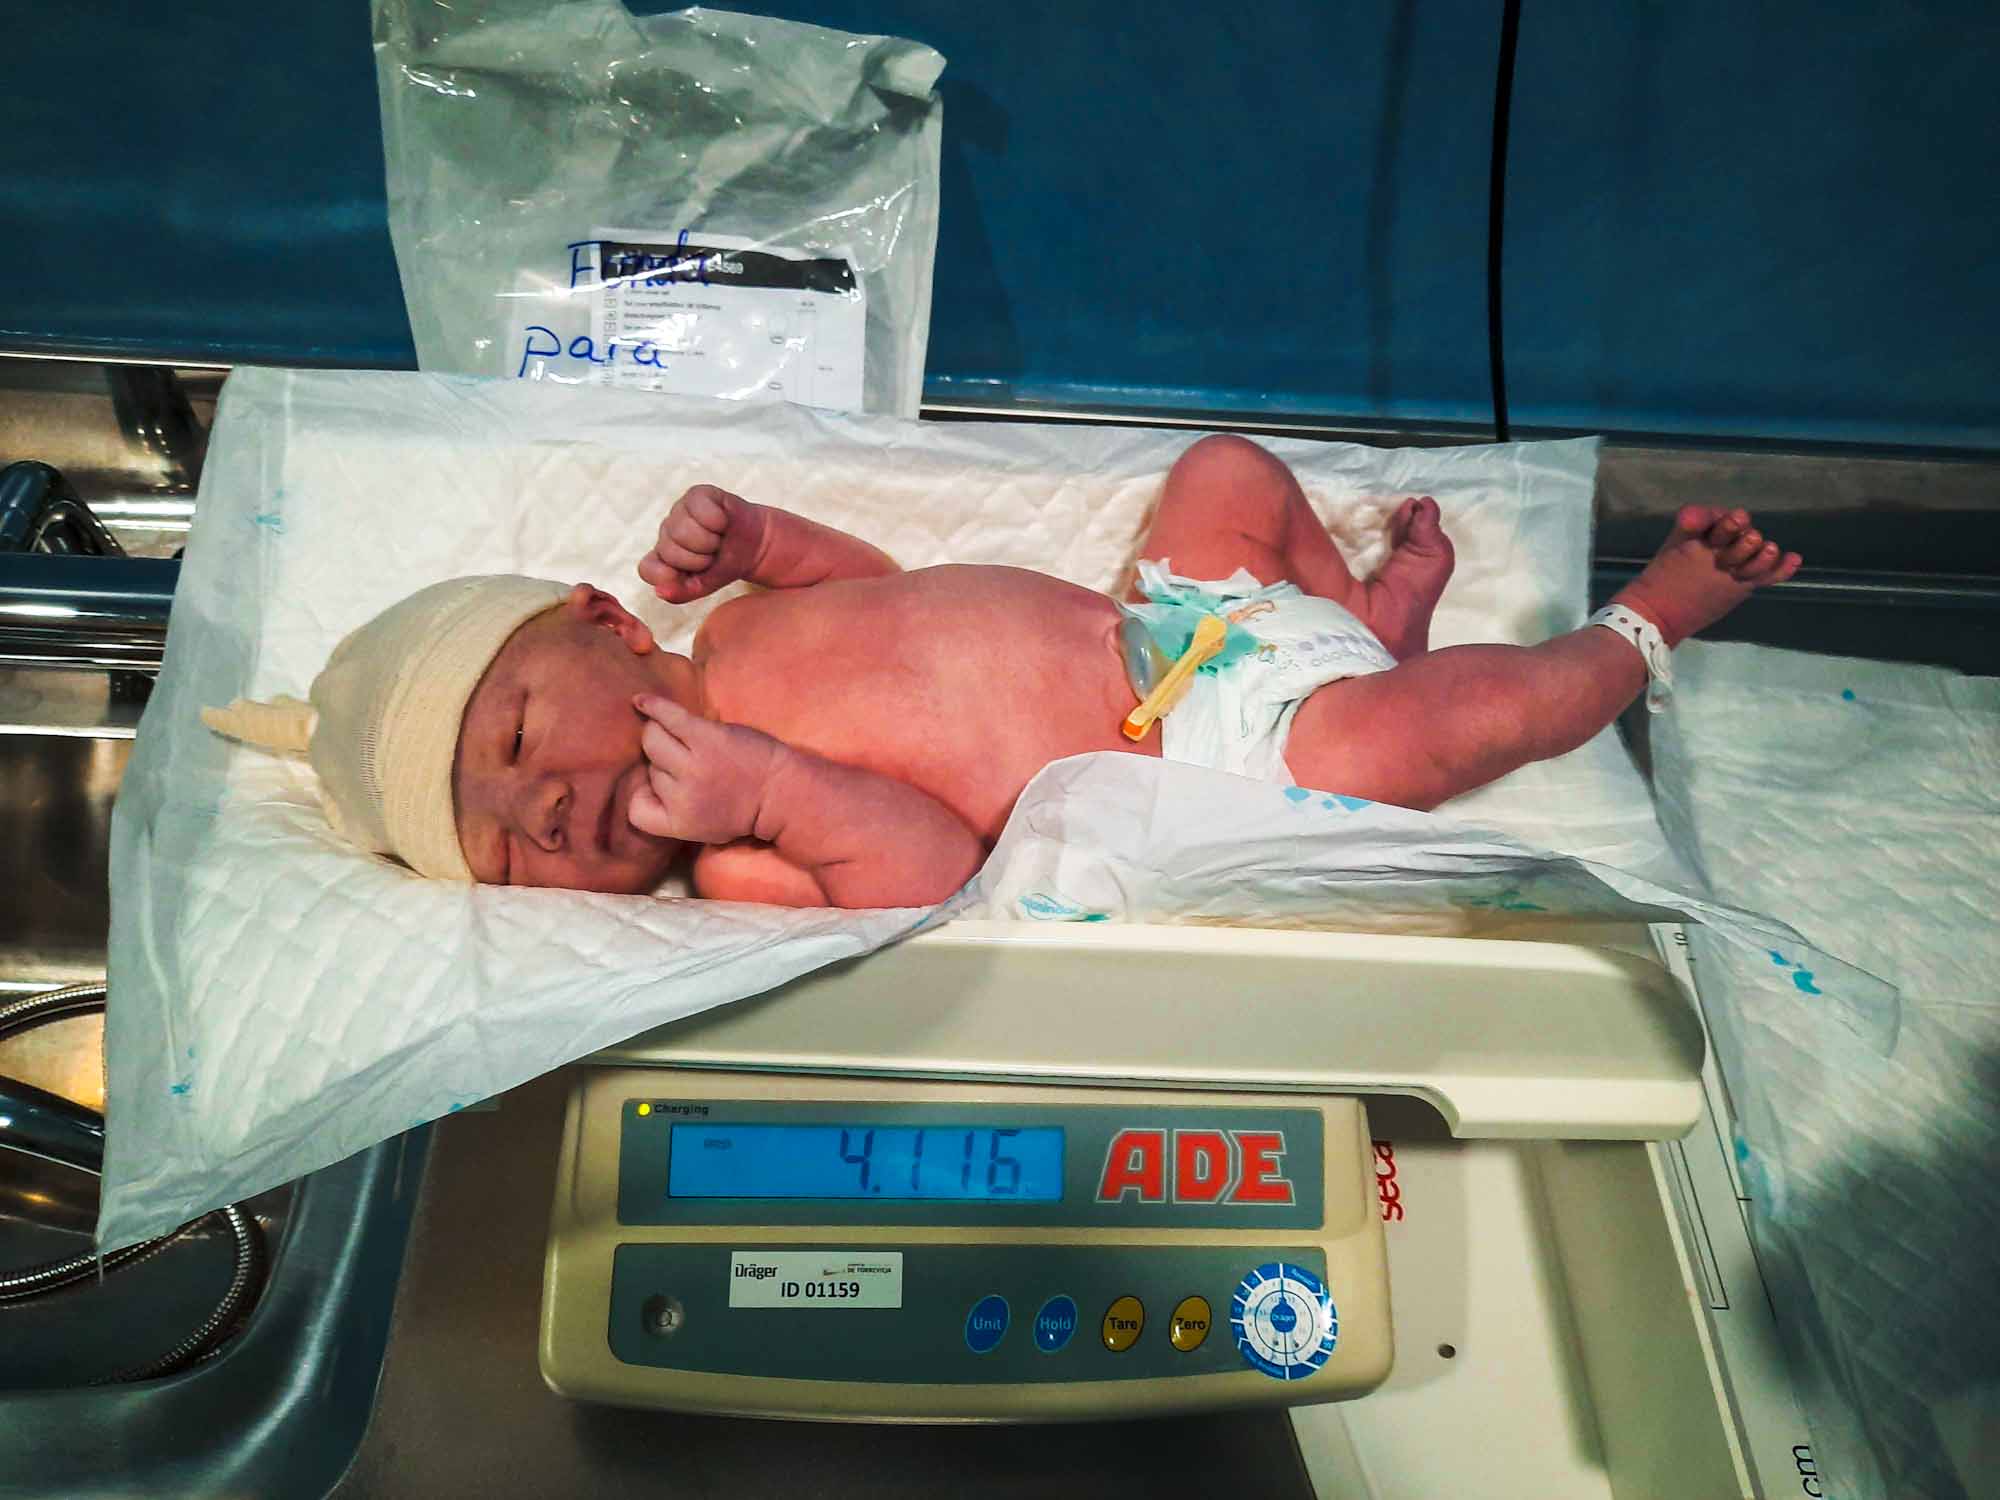 A newborn baby, lying on weighing scales